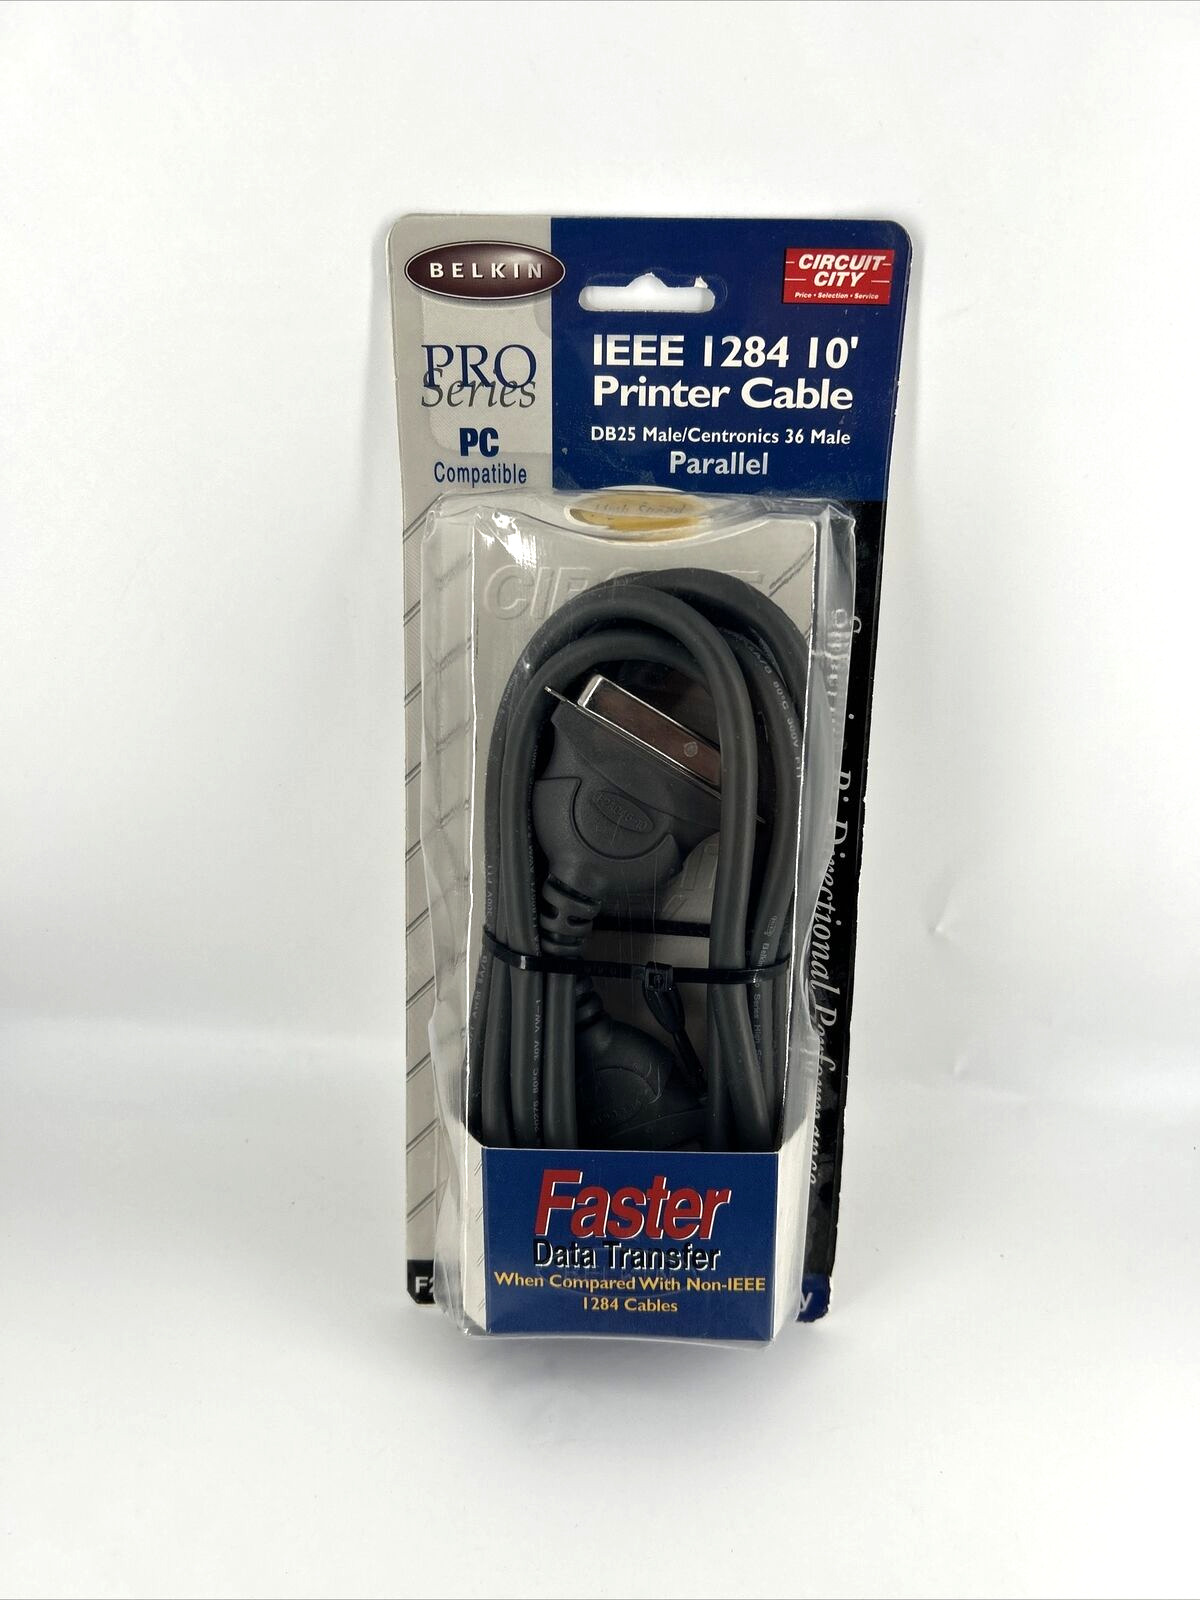 Belkin Pro Series Printer Cable IEEE I284 DB25 Male/36 Male PC Compatible NEW